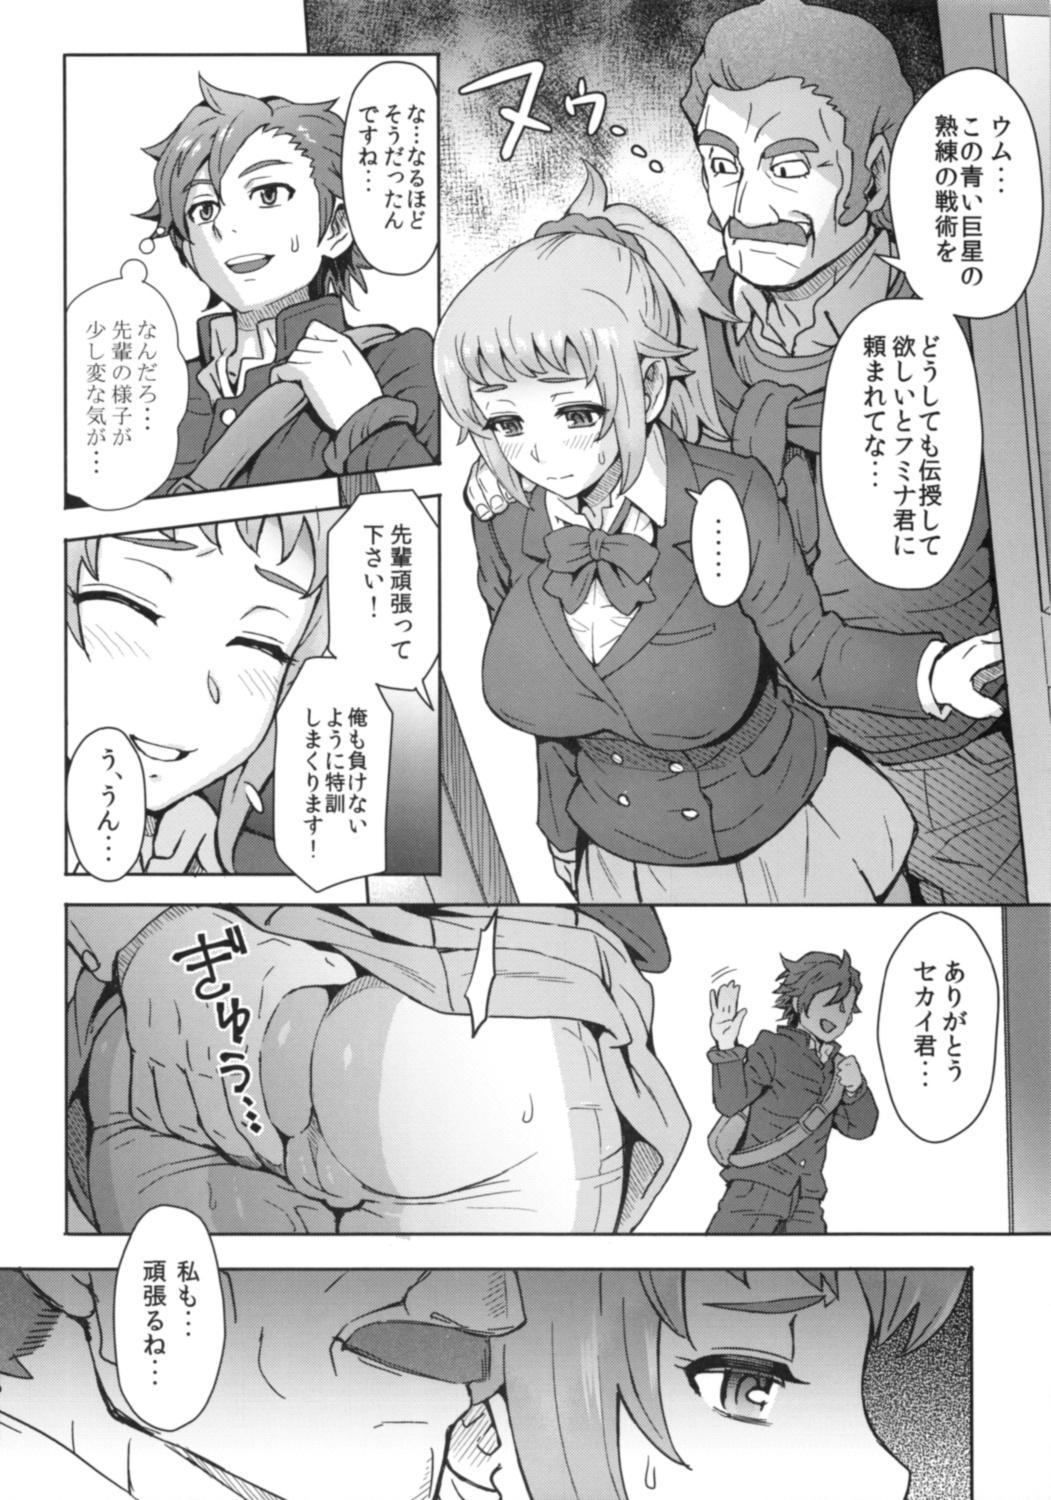 Asian Pichi Muchi! - Gundam build fighters try Hot Teen - Page 3